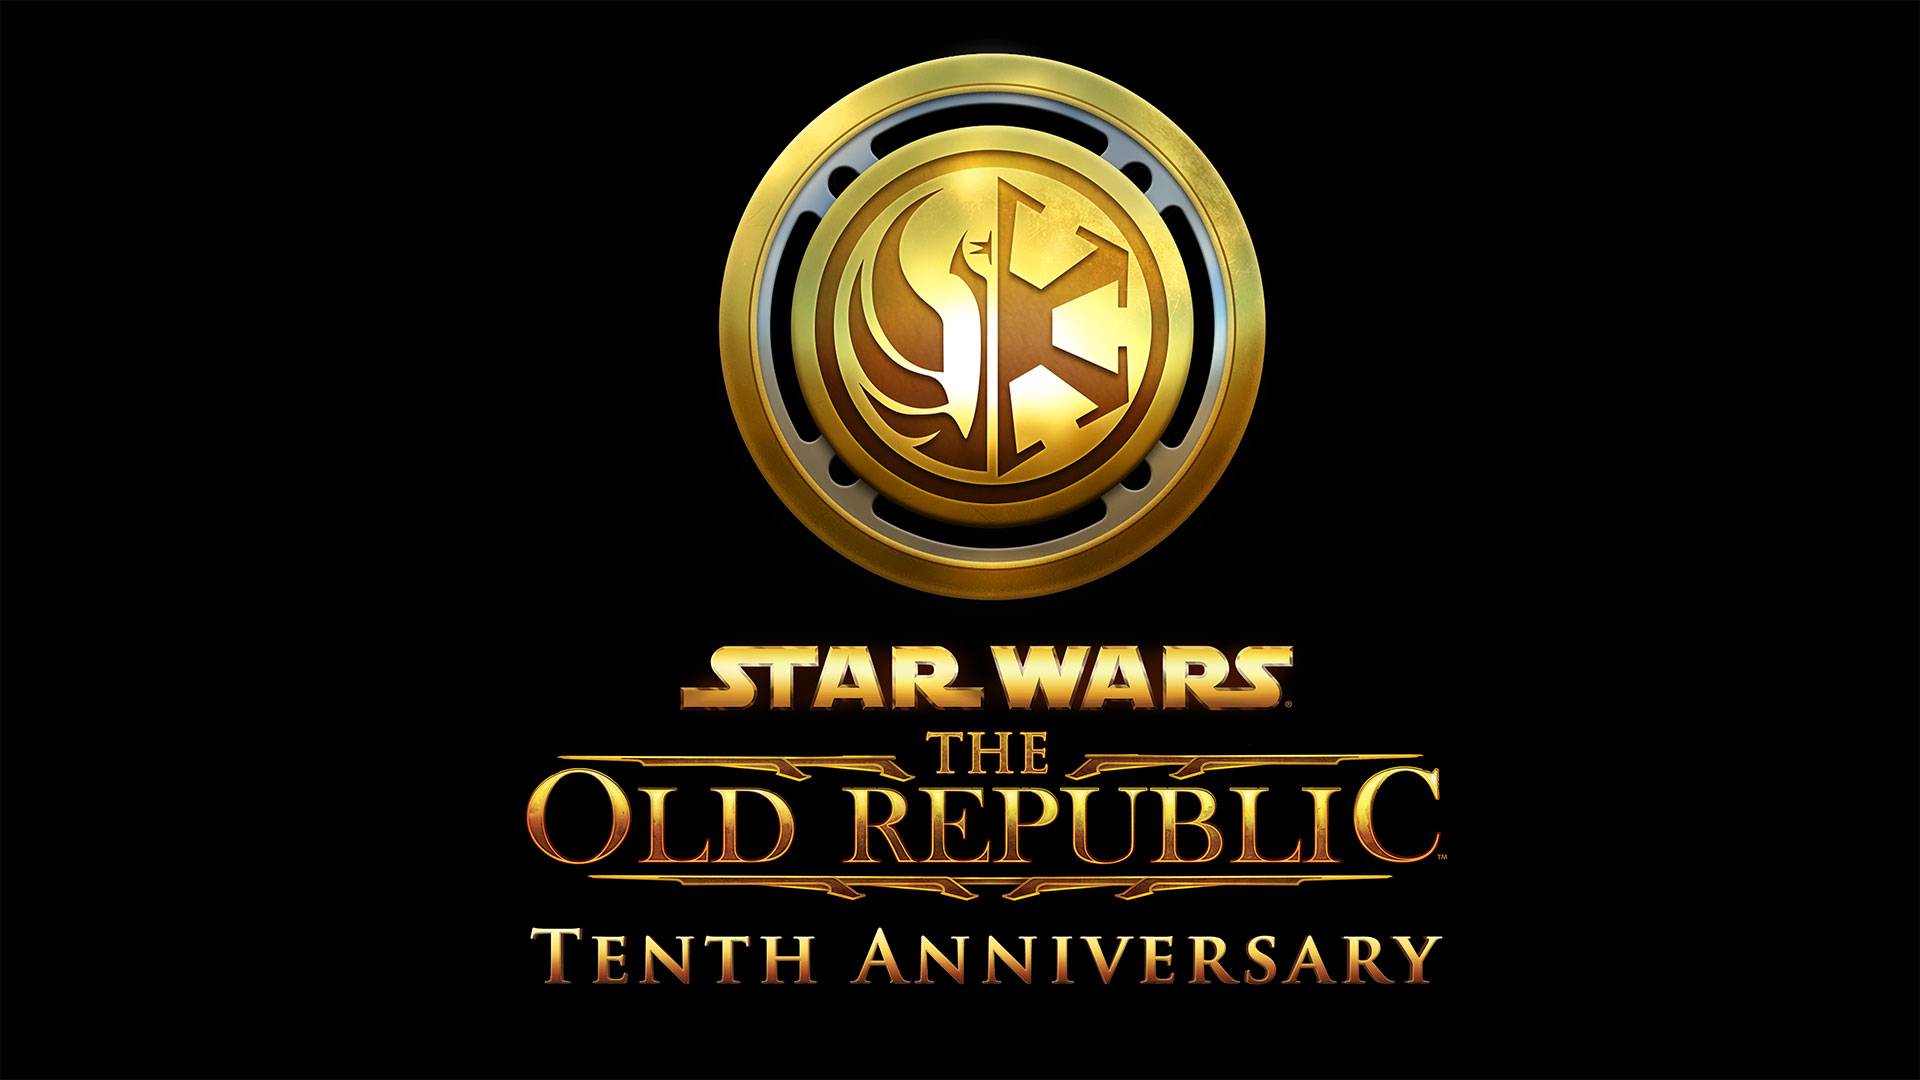 Star Wars The Old Republic Celebrates 10th Anniversary With Substantial Future Roadmap